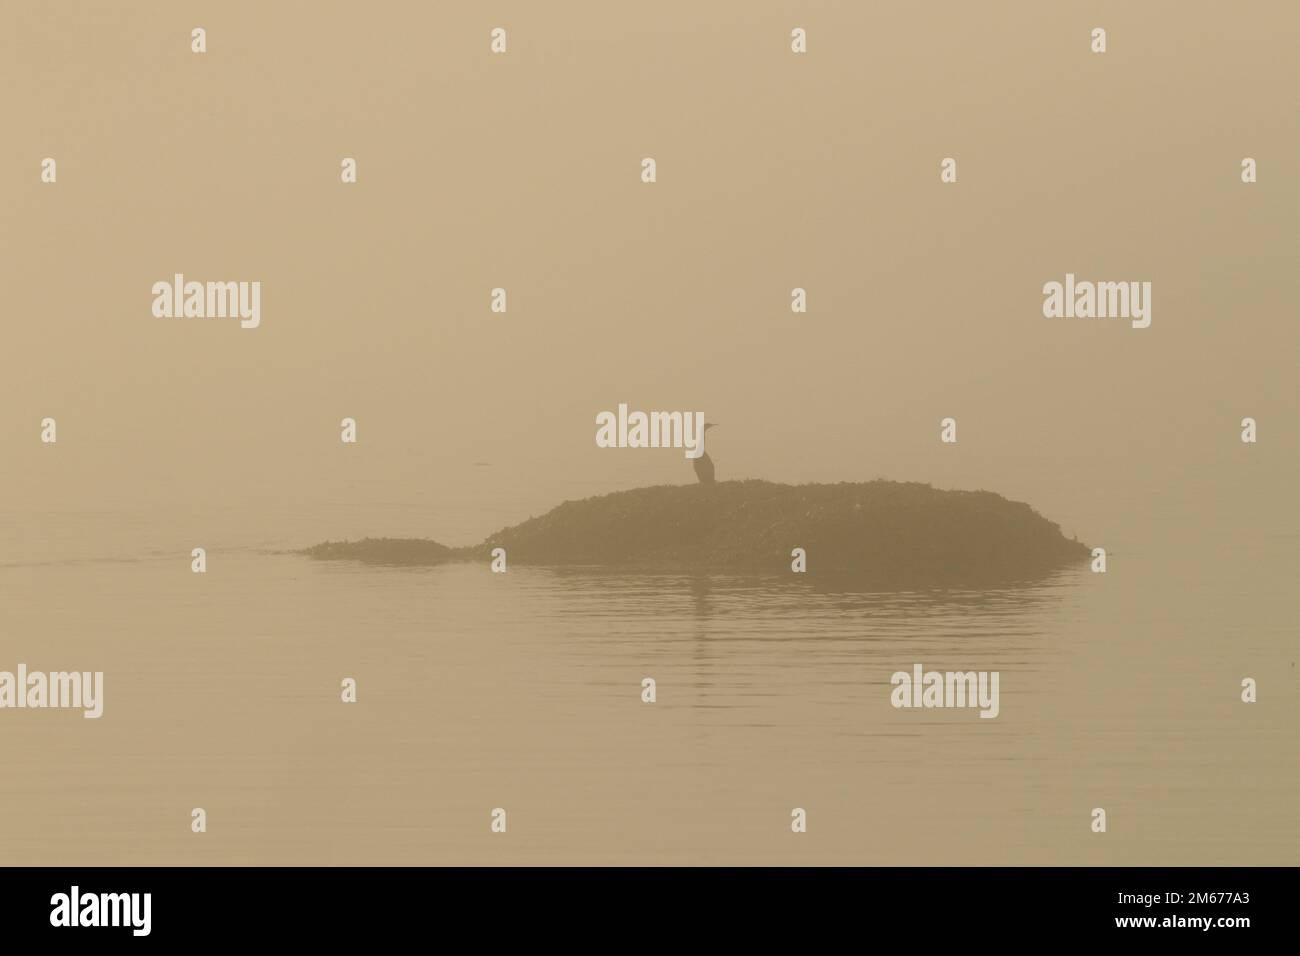 A pelagic cormorant (Urile pelagicus) standing on a rocky islet in the ocean through thick fog at sunrise. Taken in Victoria, BC, Canada. Stock Photo